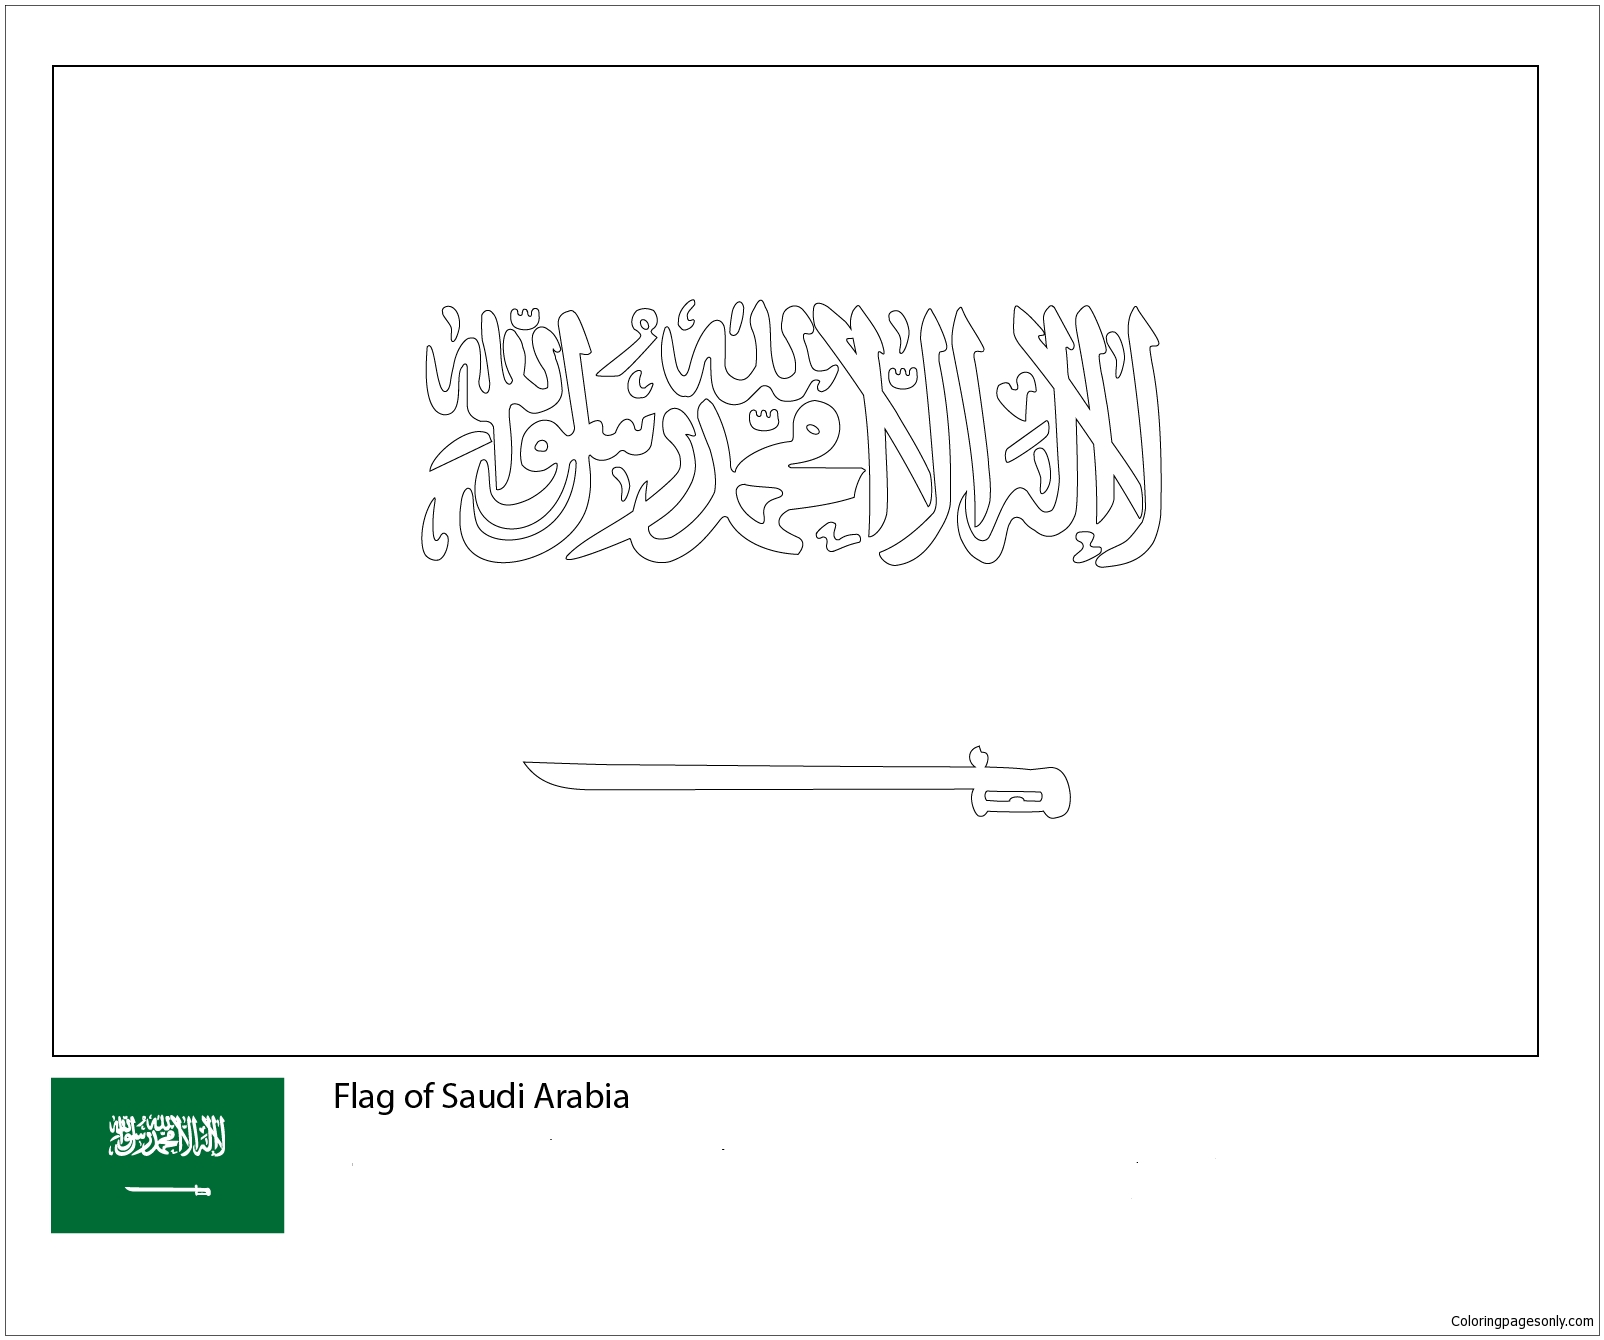 Flag of Saudi Arabia-World Cup 2018 Coloring Page